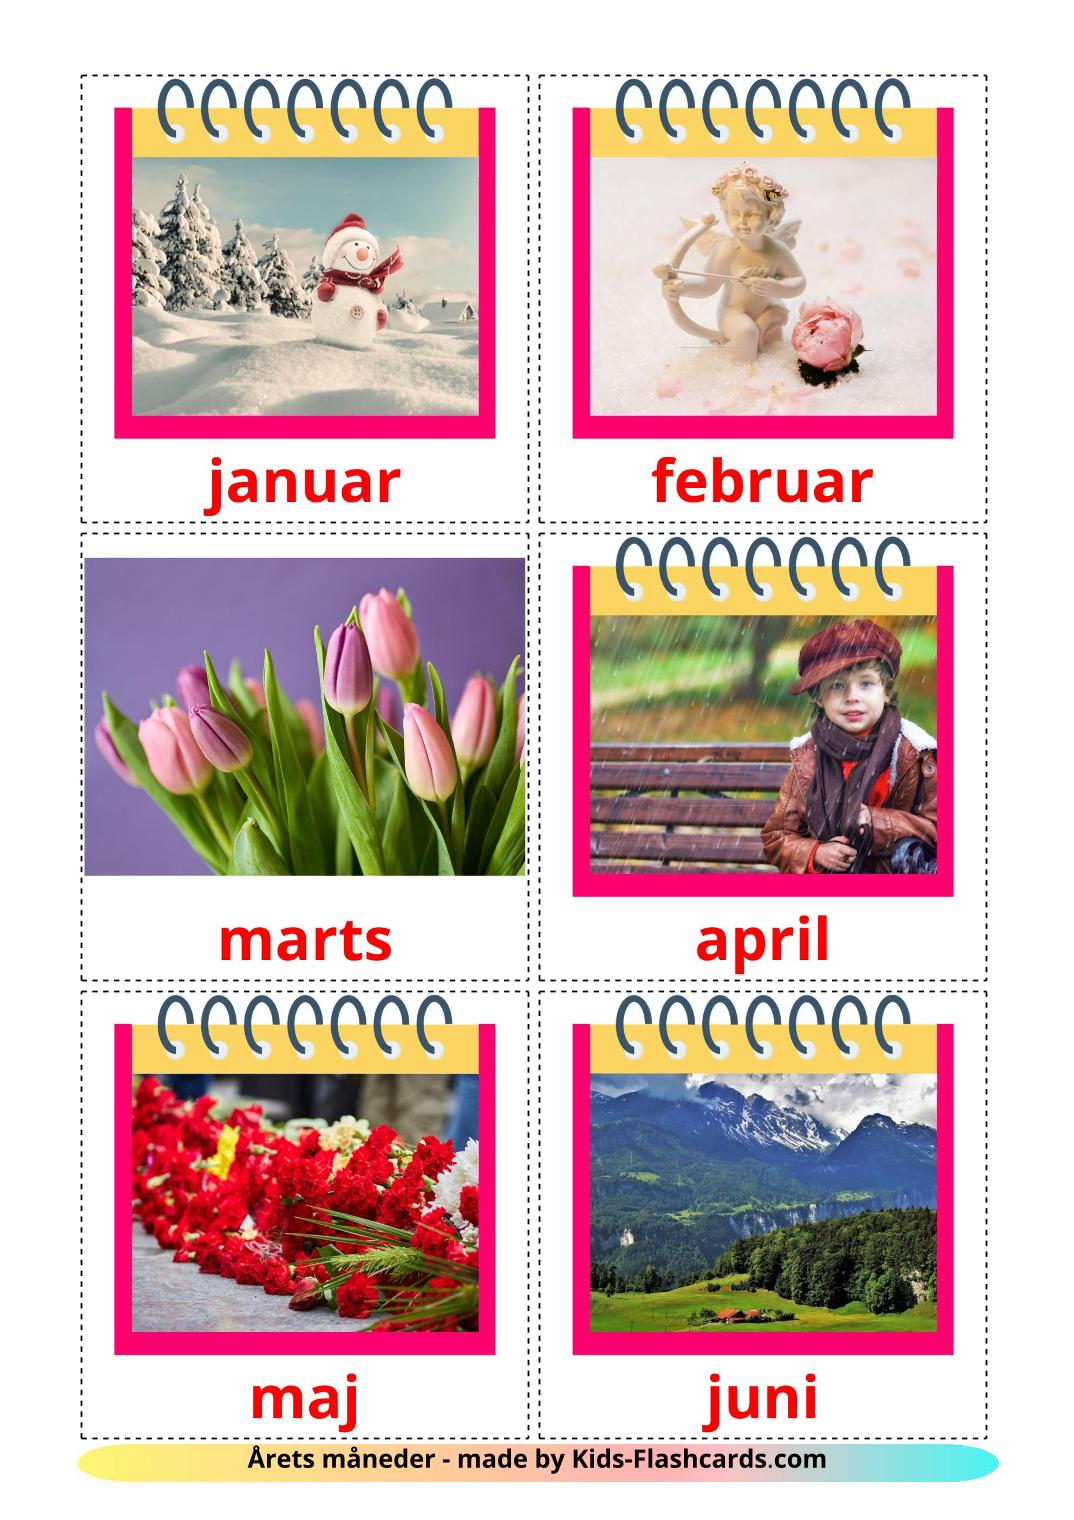 Months of the Year - 12 Free Printable dansk Flashcards 